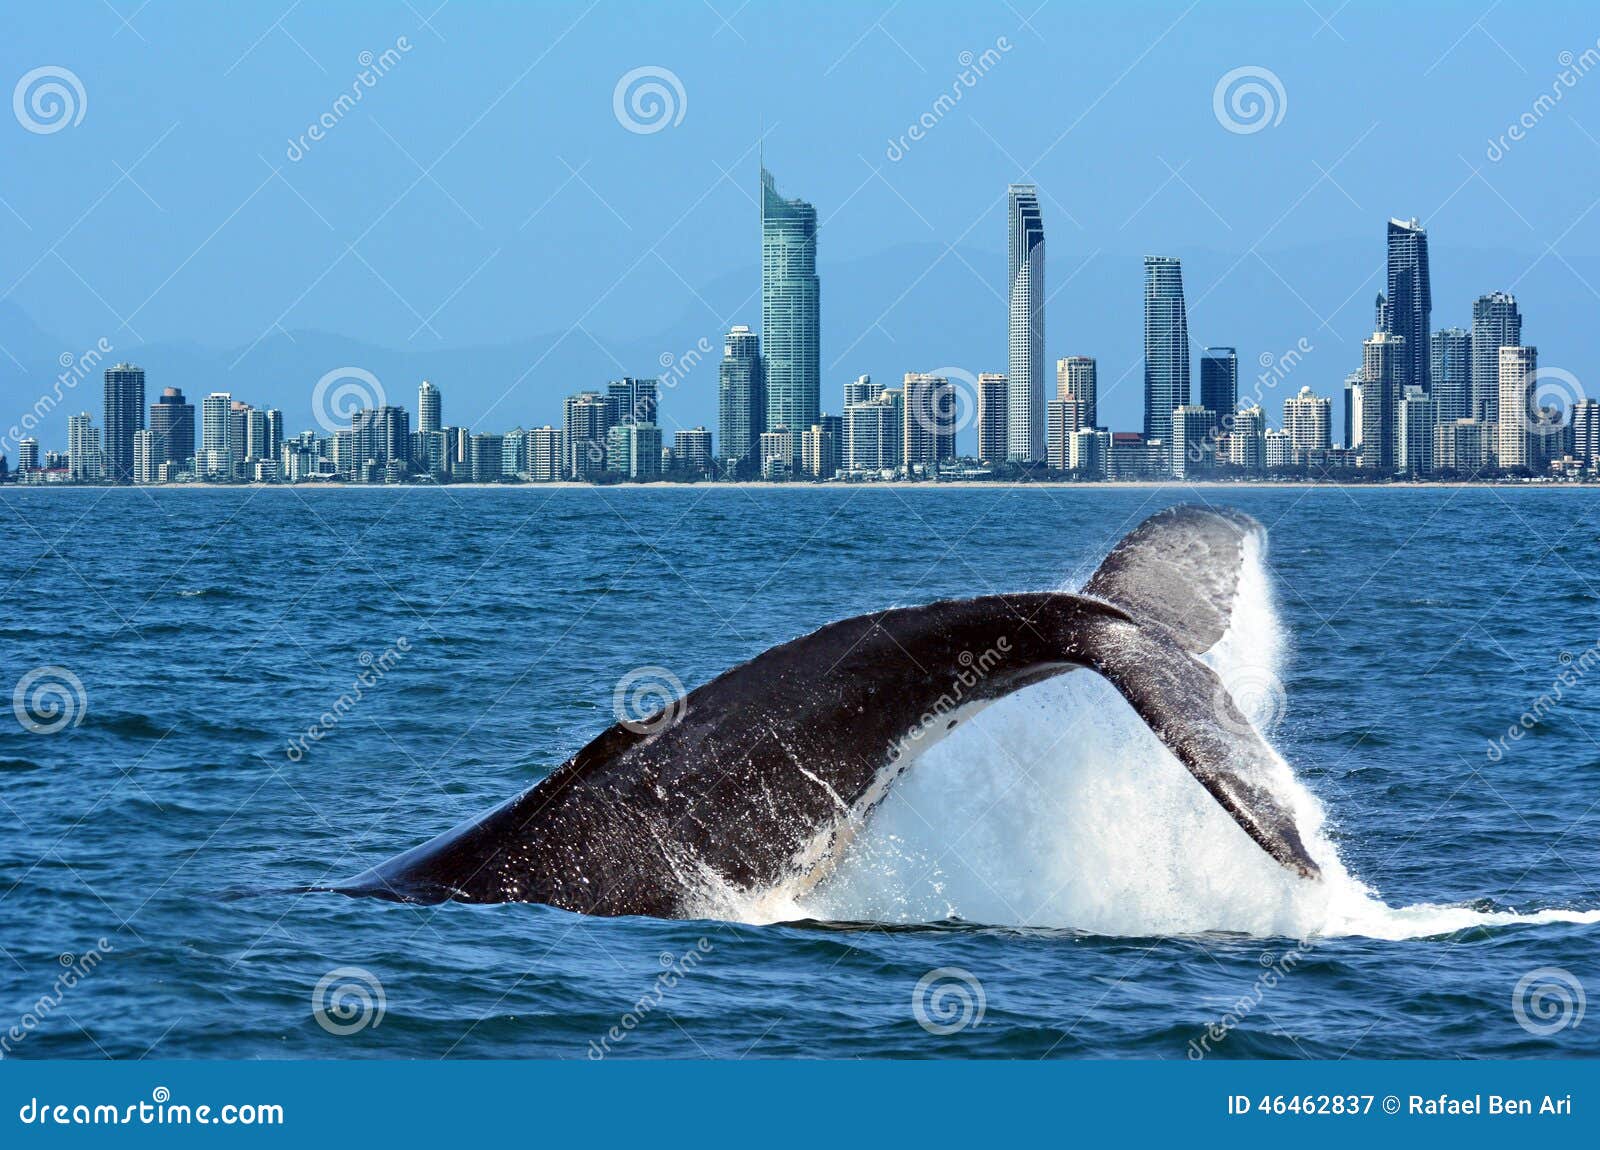 whale watching in gold coast australia